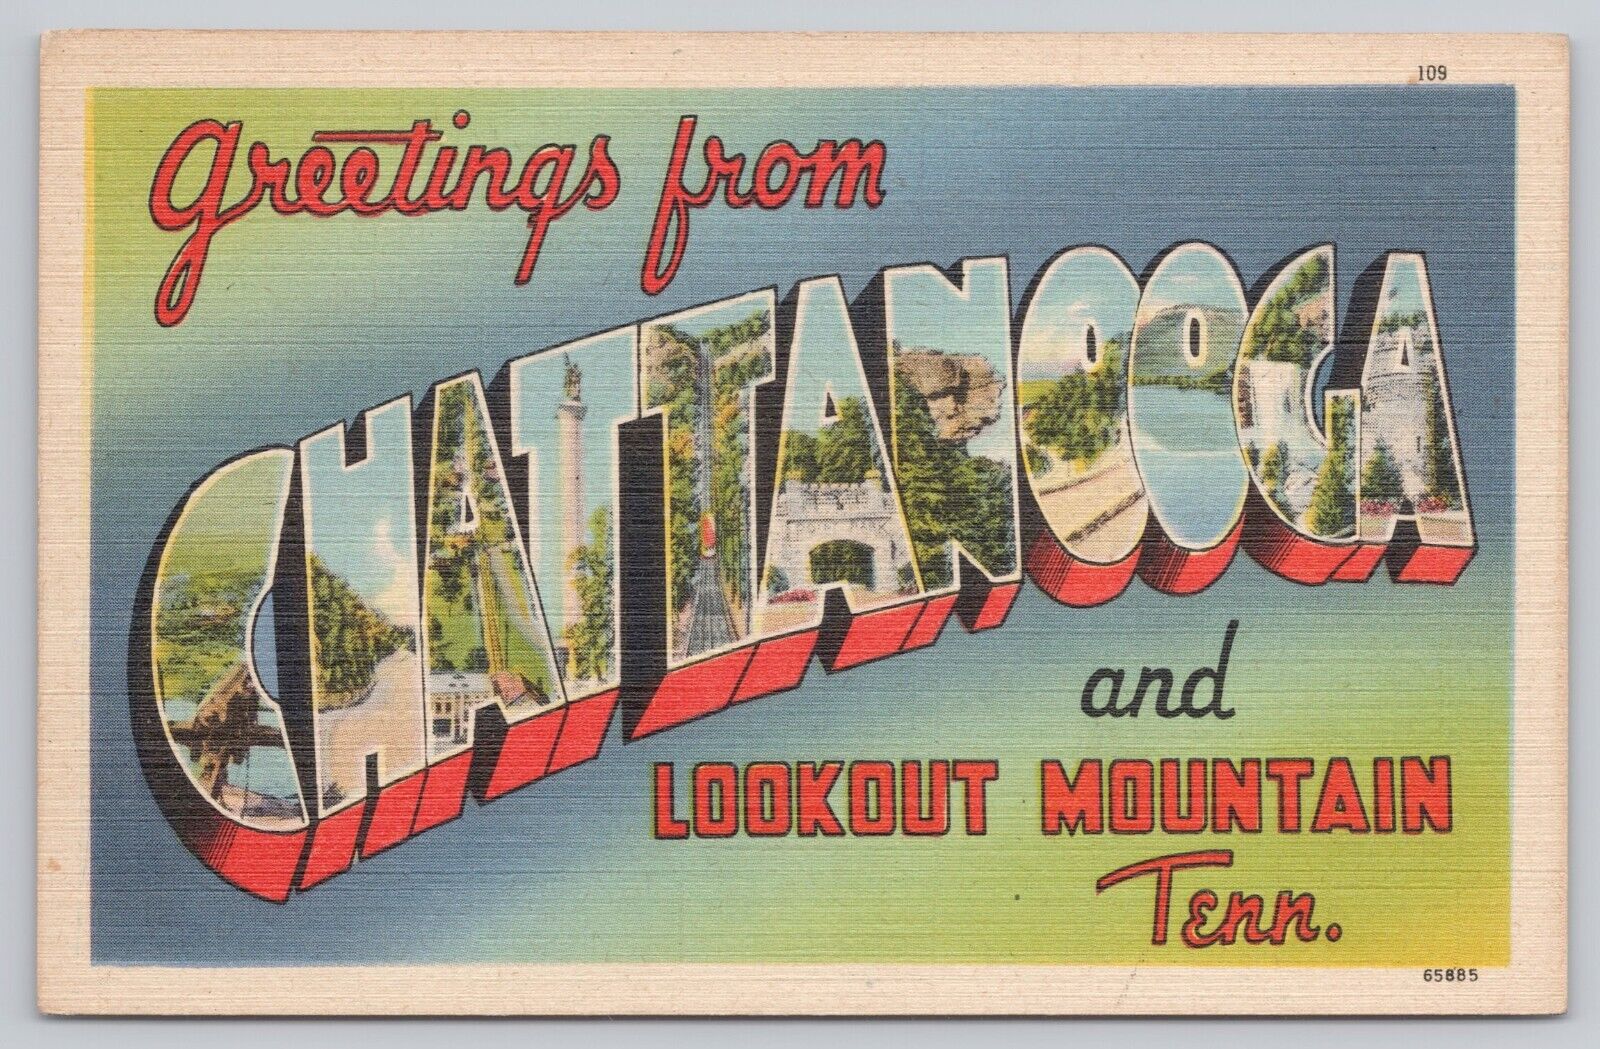 Chattanooga Tennessee, Large Letter Greetings Lookout Mountain, Vintage Postcard